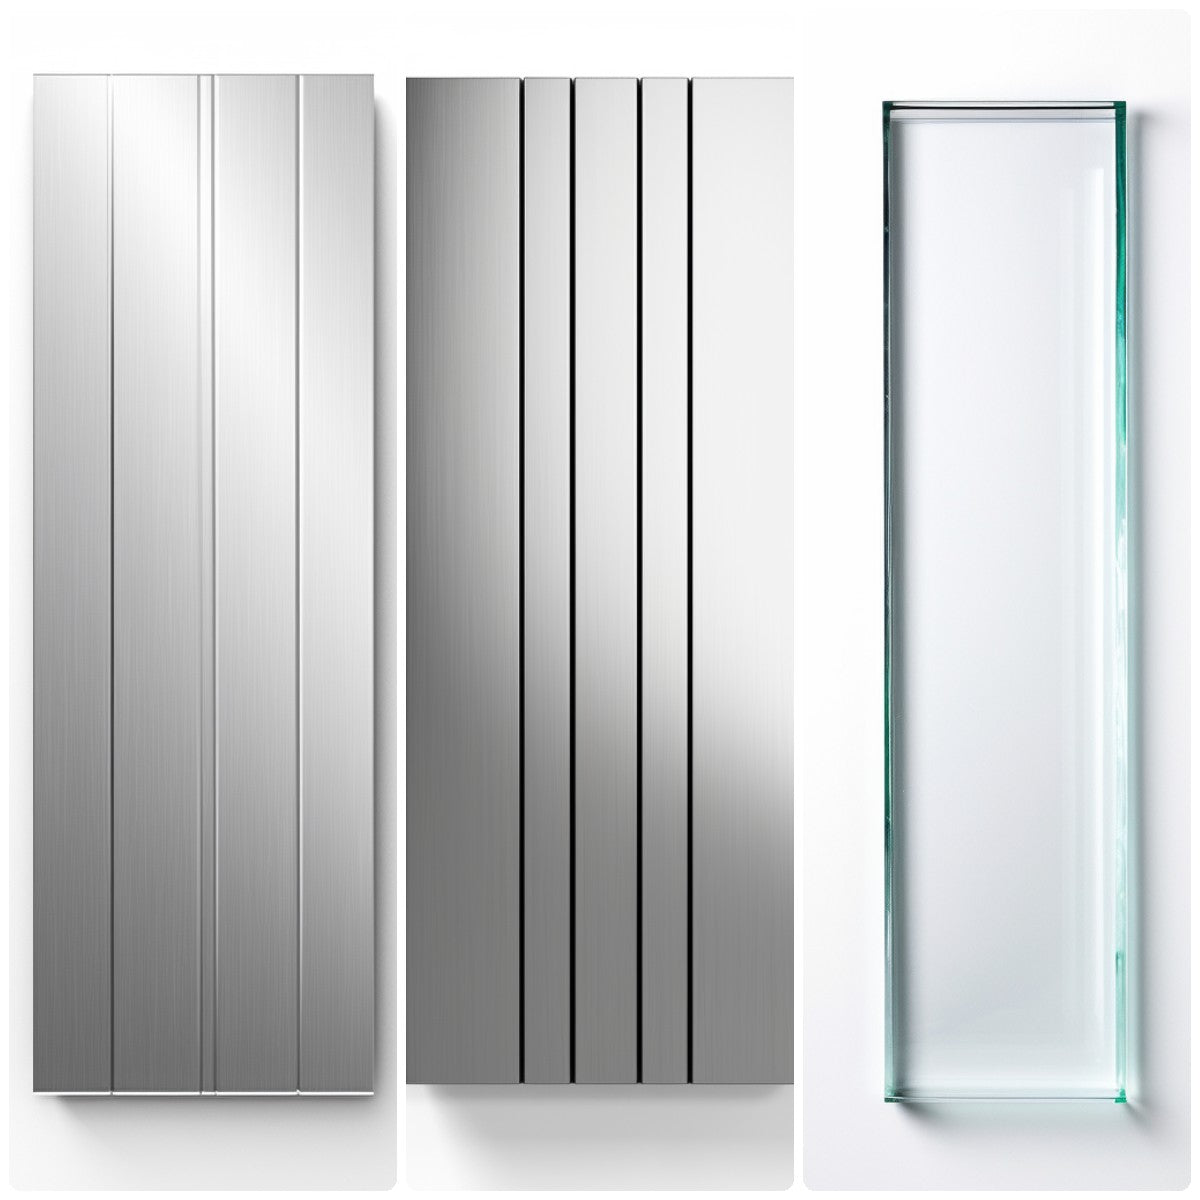 shower screen materials: a breakdown of aluminum, steel, and glass options